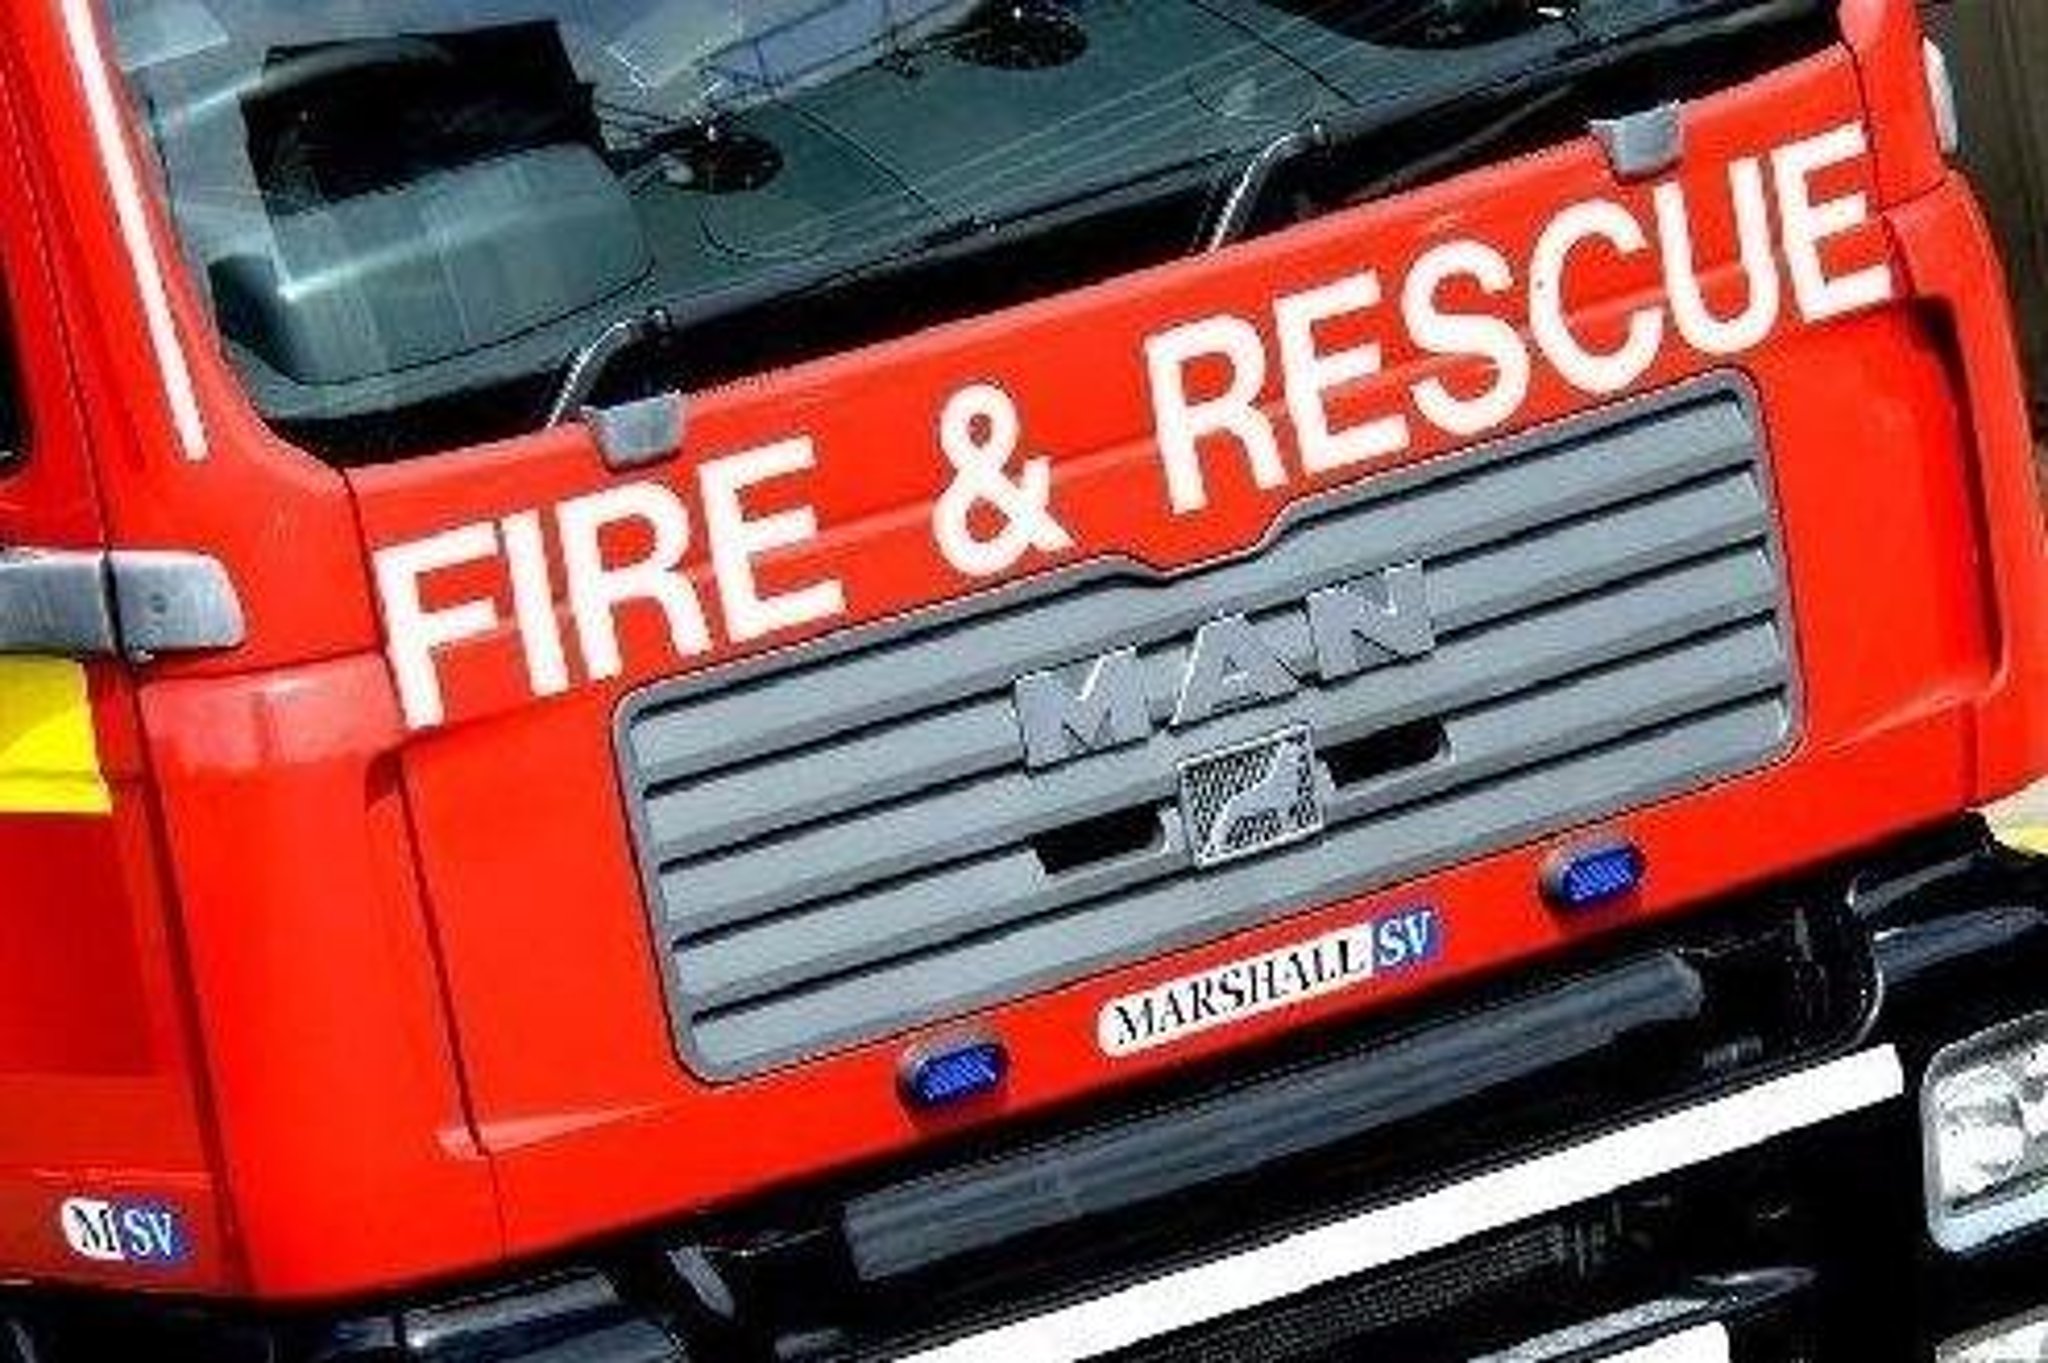 Arson attack in early hours after sofa set alight inside property - 'thankfully no-one was injured'